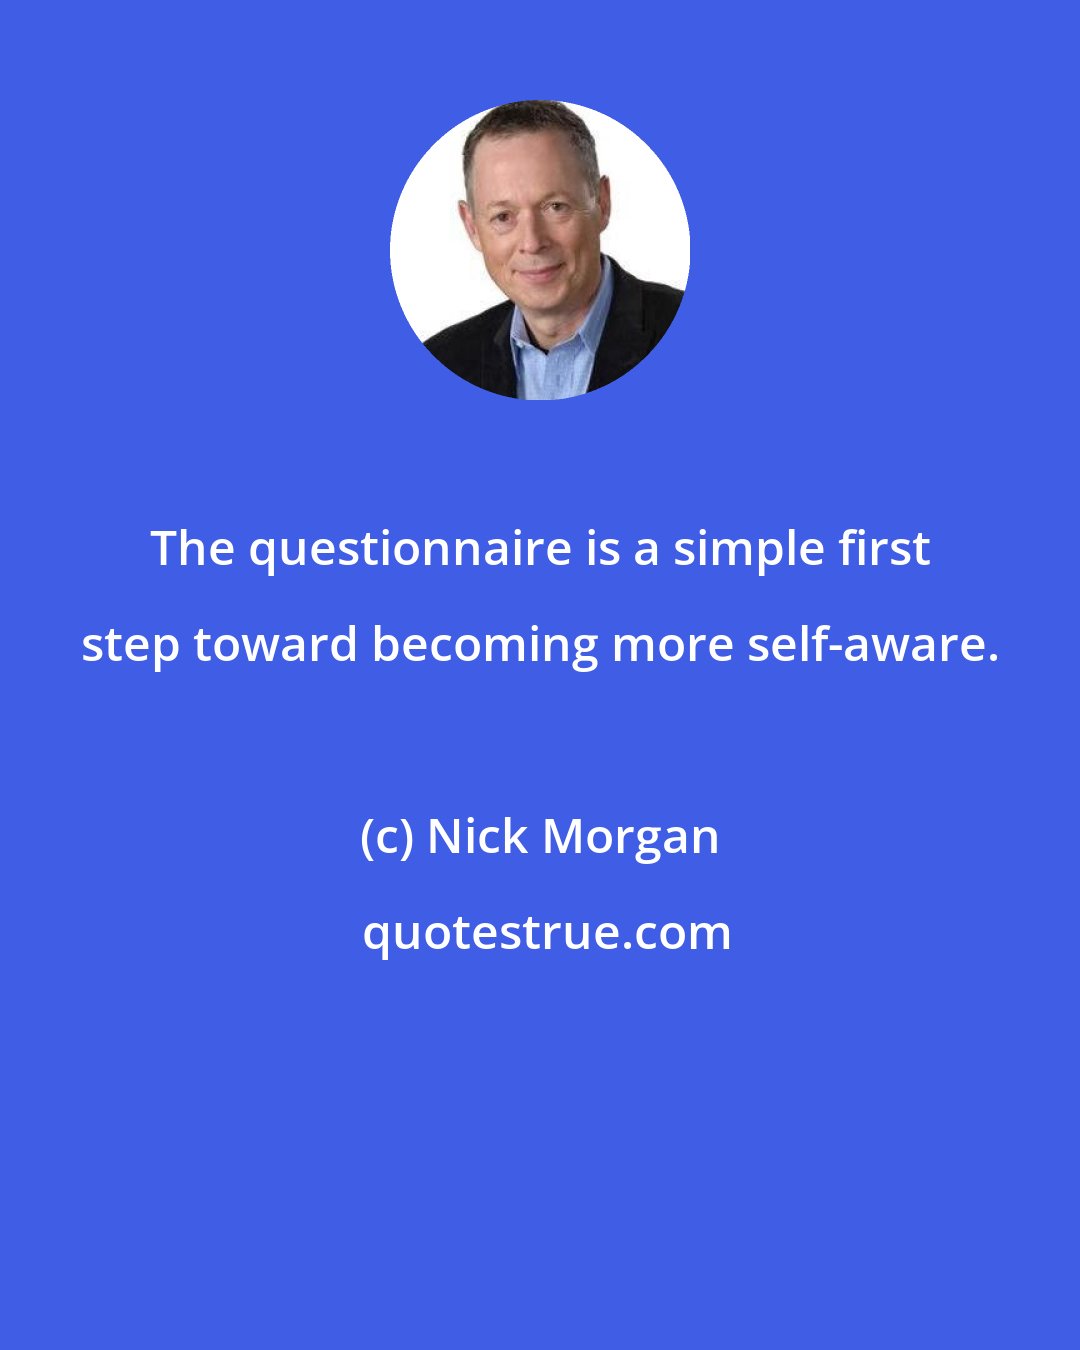 Nick Morgan: The questionnaire is a simple first step toward becoming more self-aware.